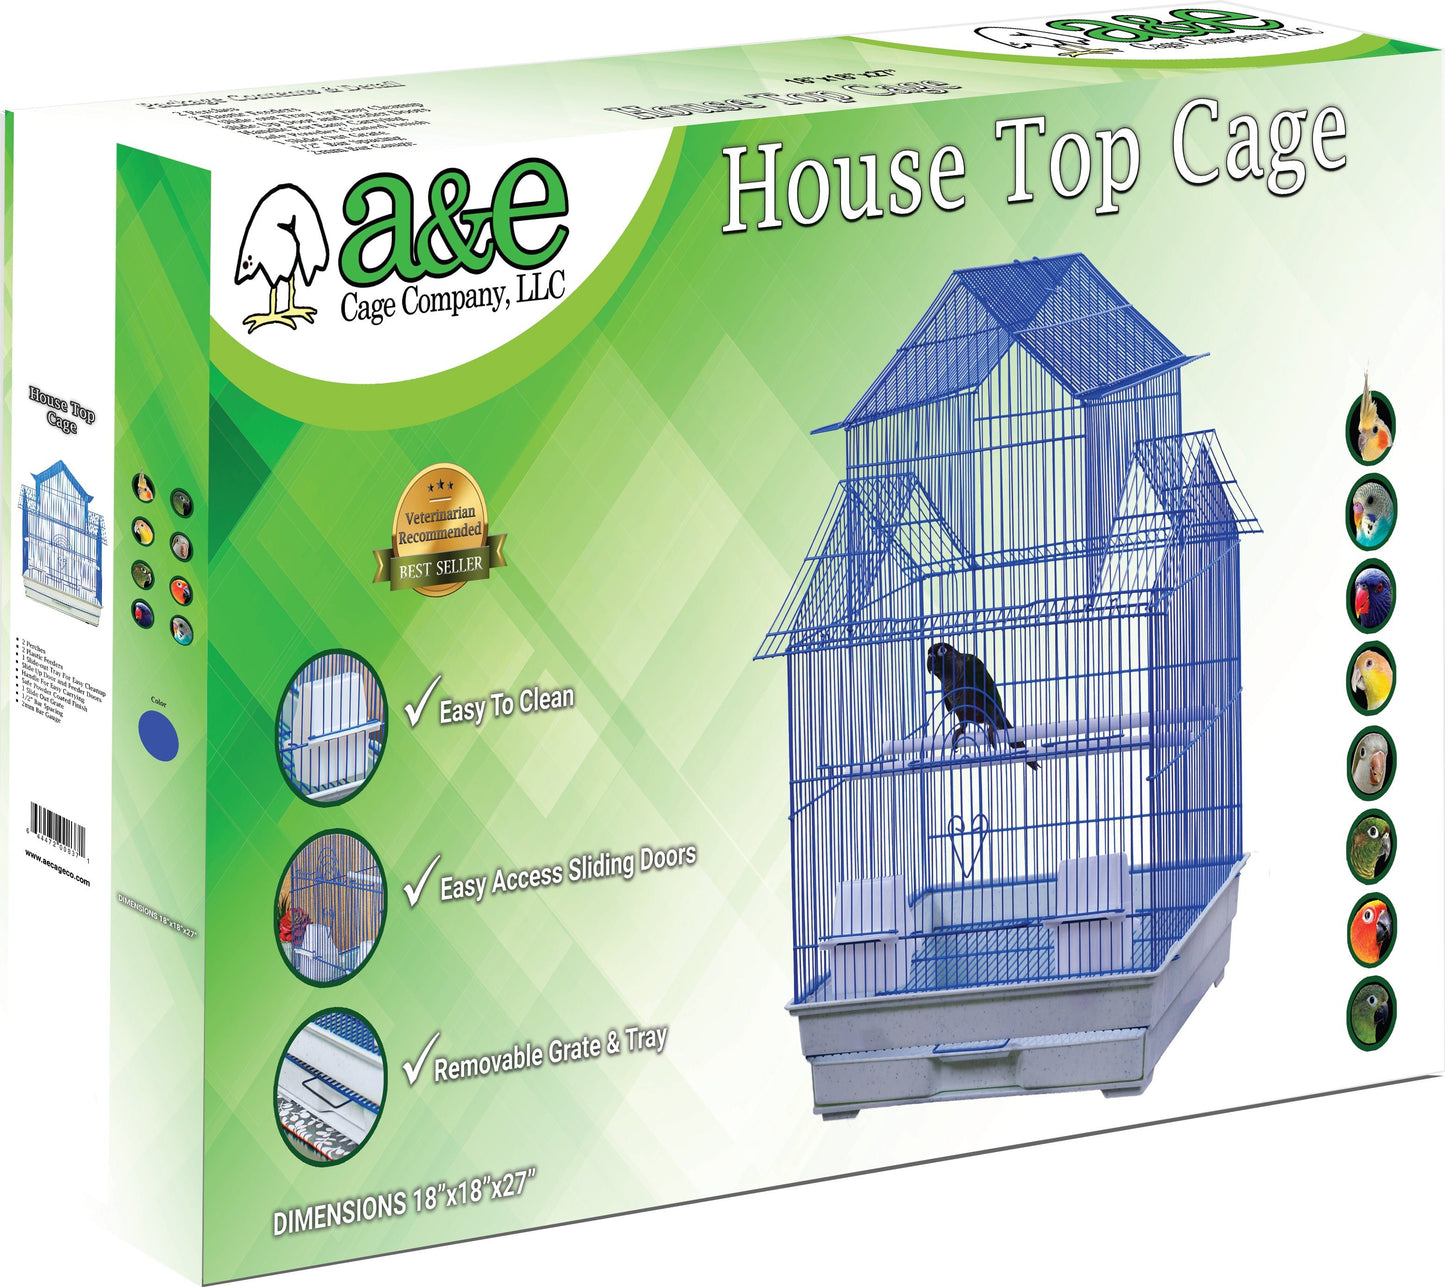 House Top Cage in Retail Box 18"x18"